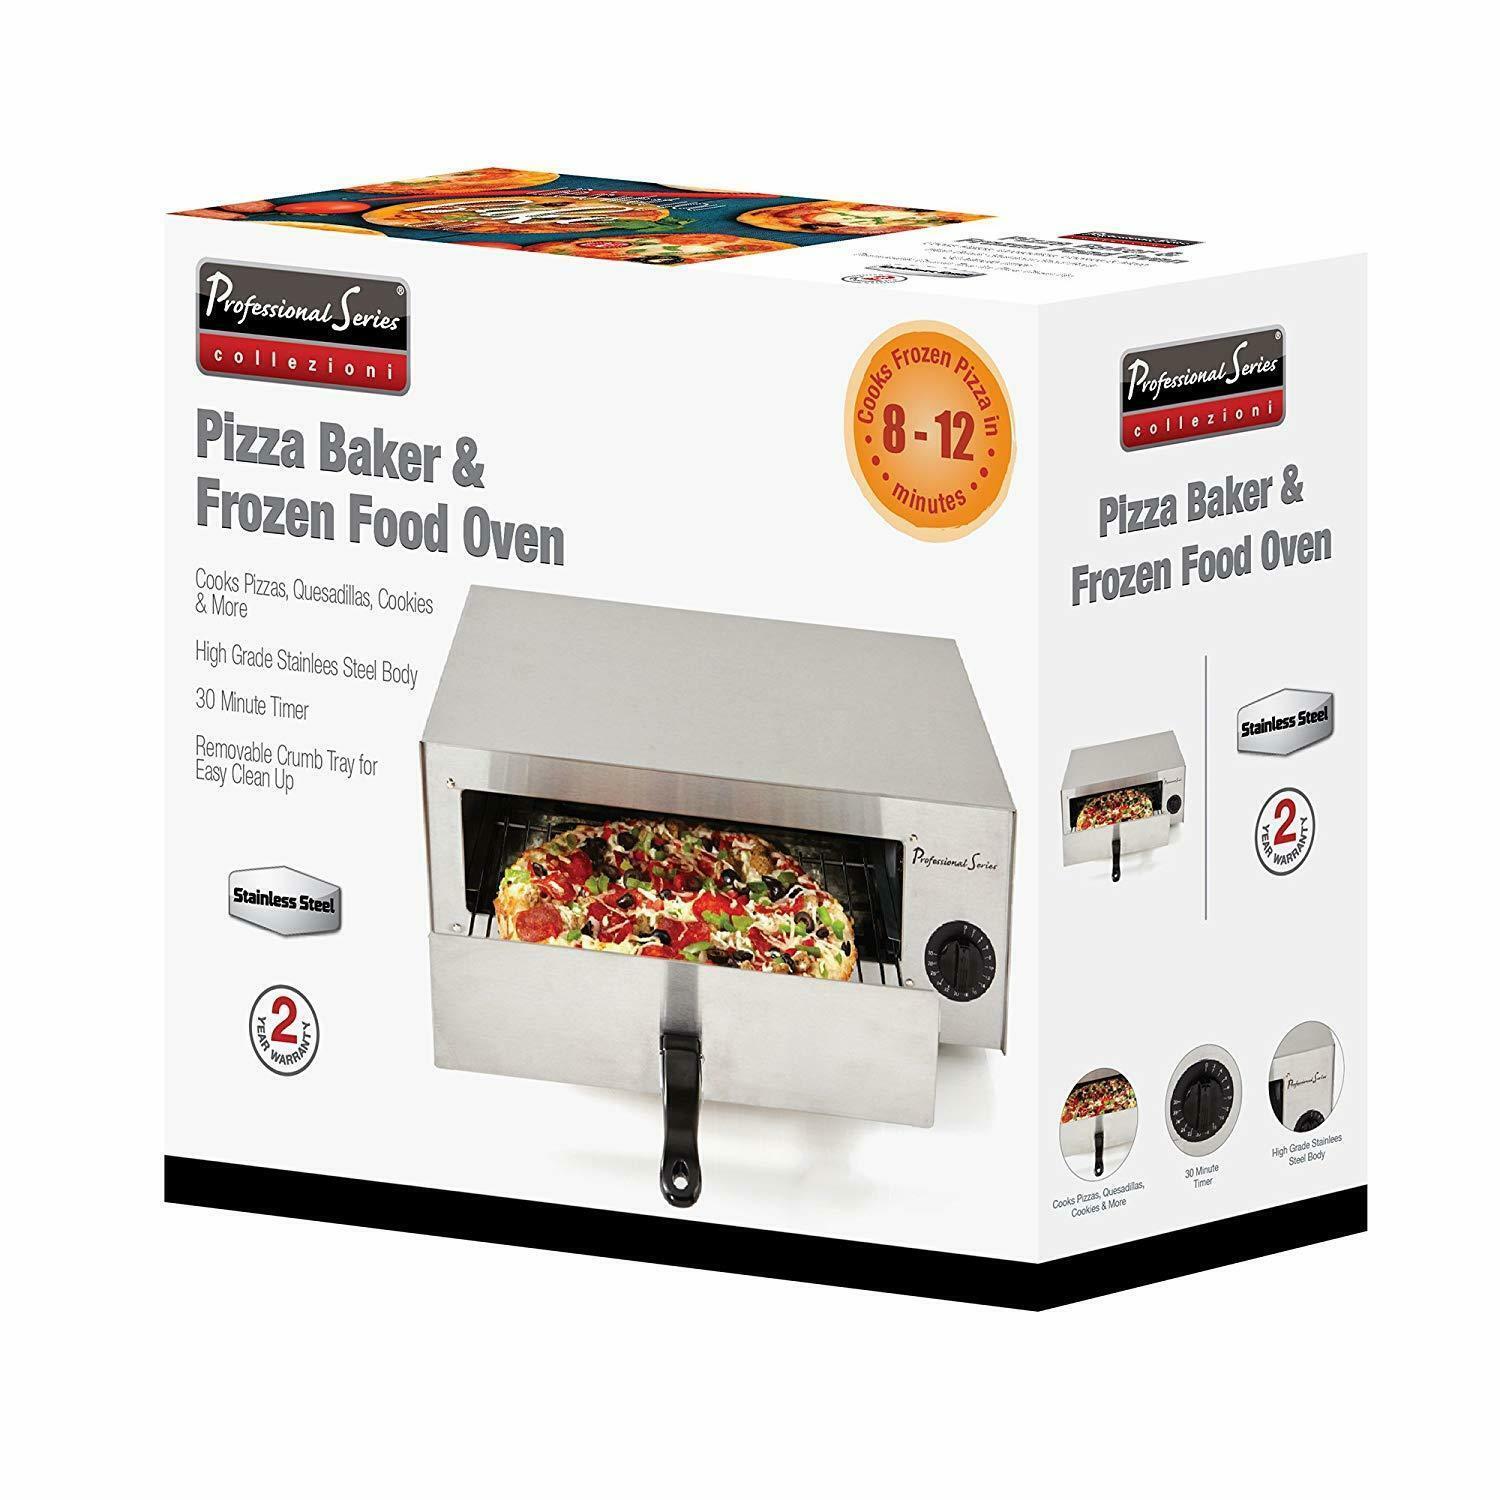 Professional Series Ps75891 Stainless Steel 12" Pizza Baker Frozen Food Oven W..